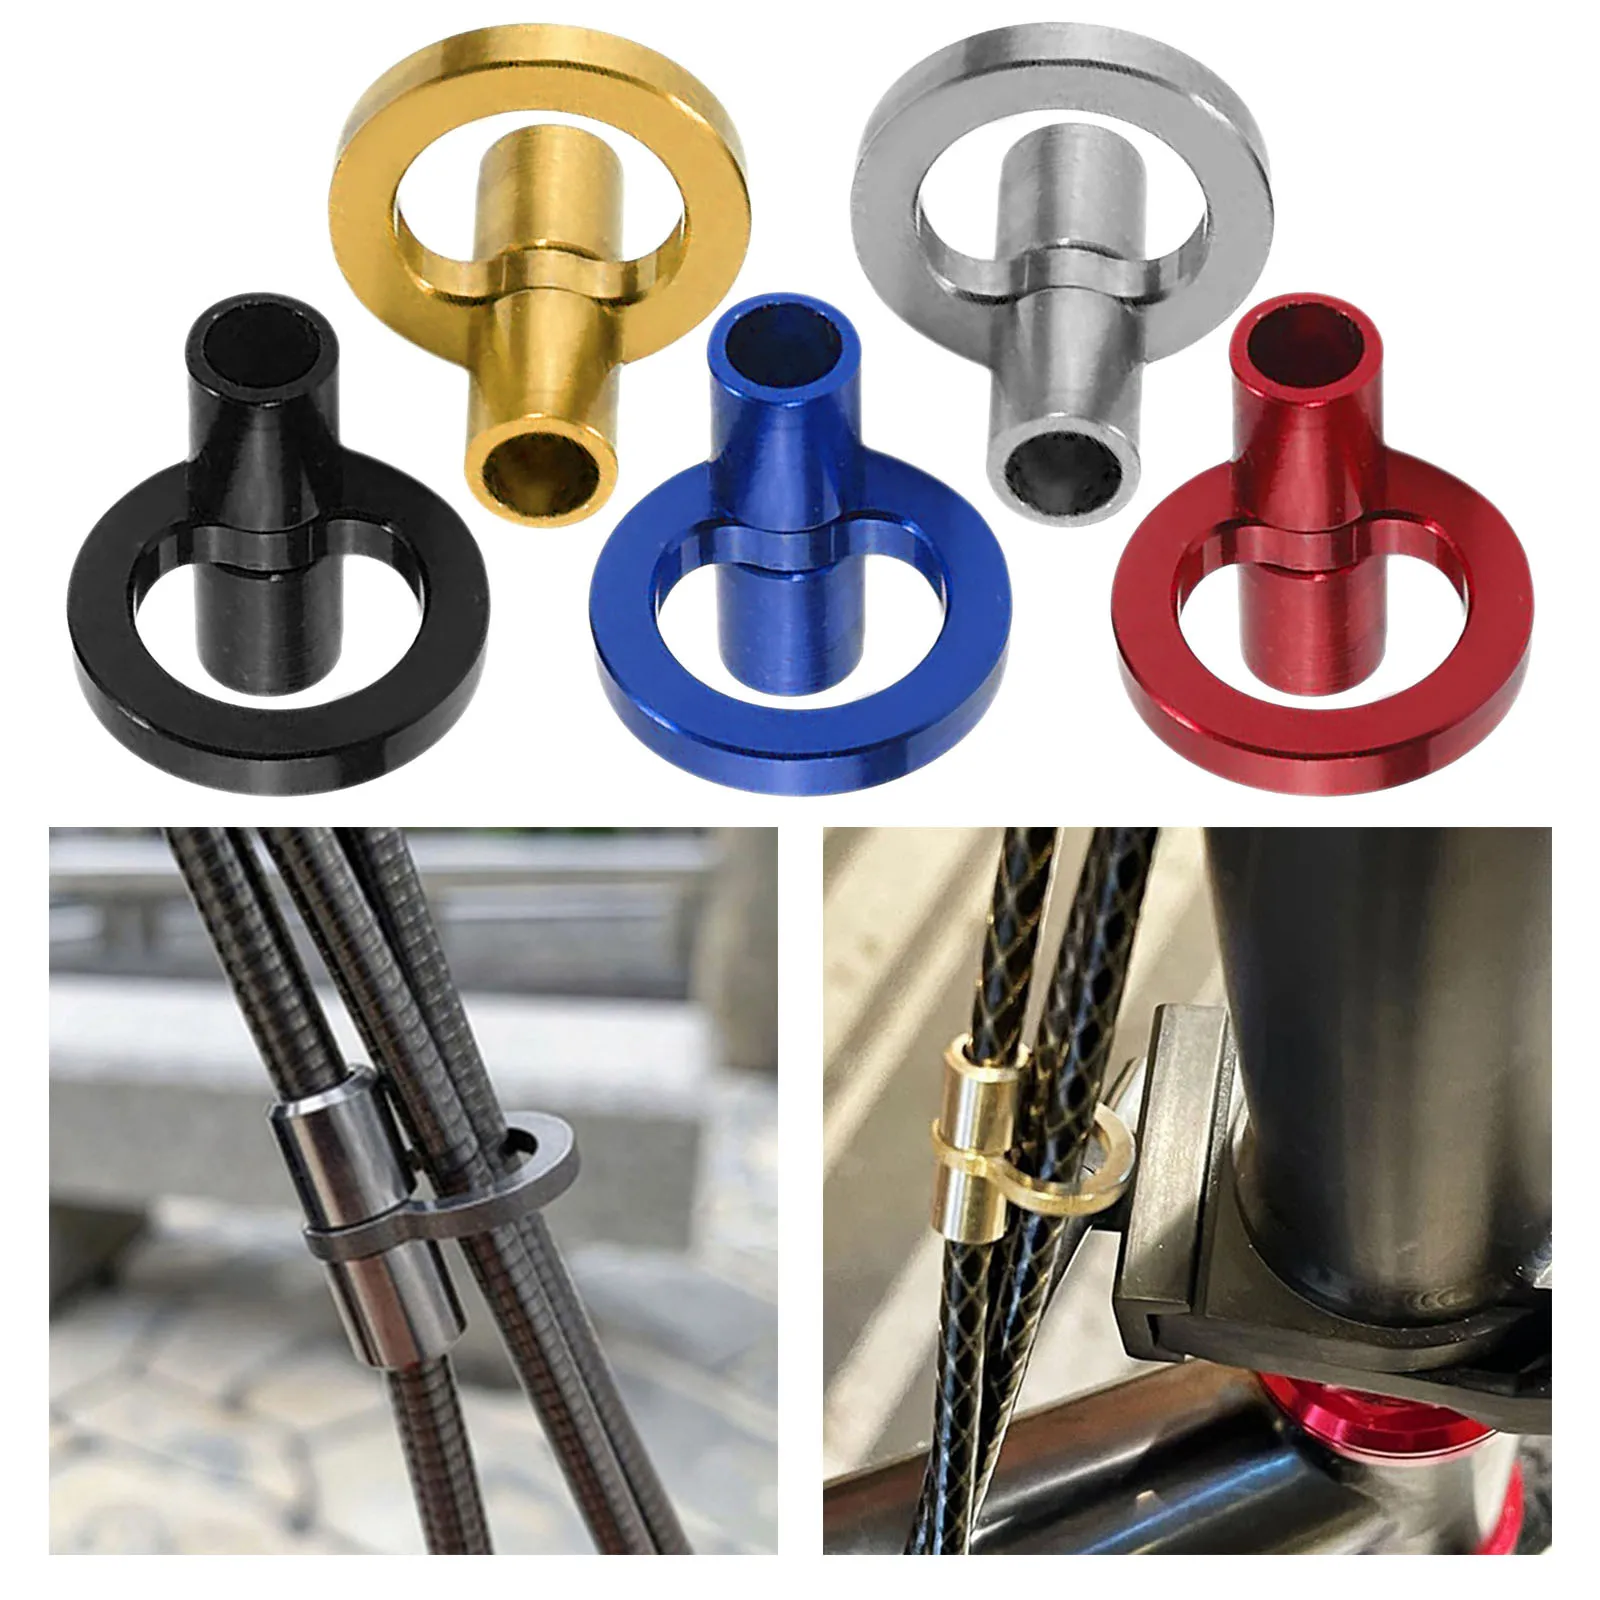 Bicycle Oil Tube Fixed Clips For Brompton Bike Brake Guide Cable Tube Fixed Clamp Frame Buckle Organizer Accessories